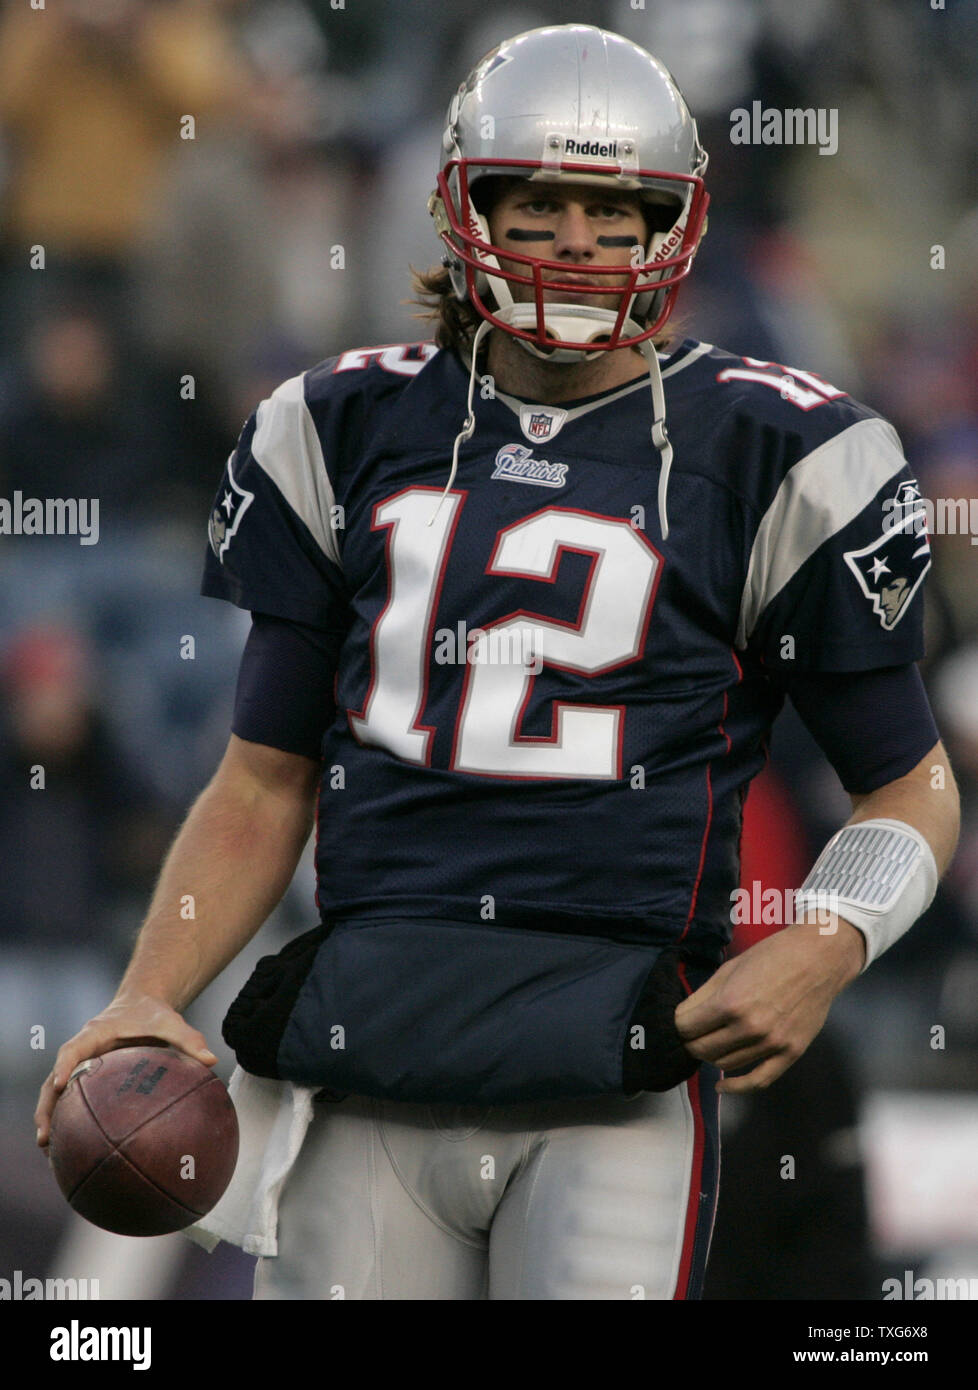 New England Patriots quarterback Tom Brady looks to a receiver during the pre-game routine with his team before the game against the Indianapolis Colts at Gillette Stadium in Foxboro, Massachusetts on November 21, 2010.    UPI/Matthew Healey Stock Photo